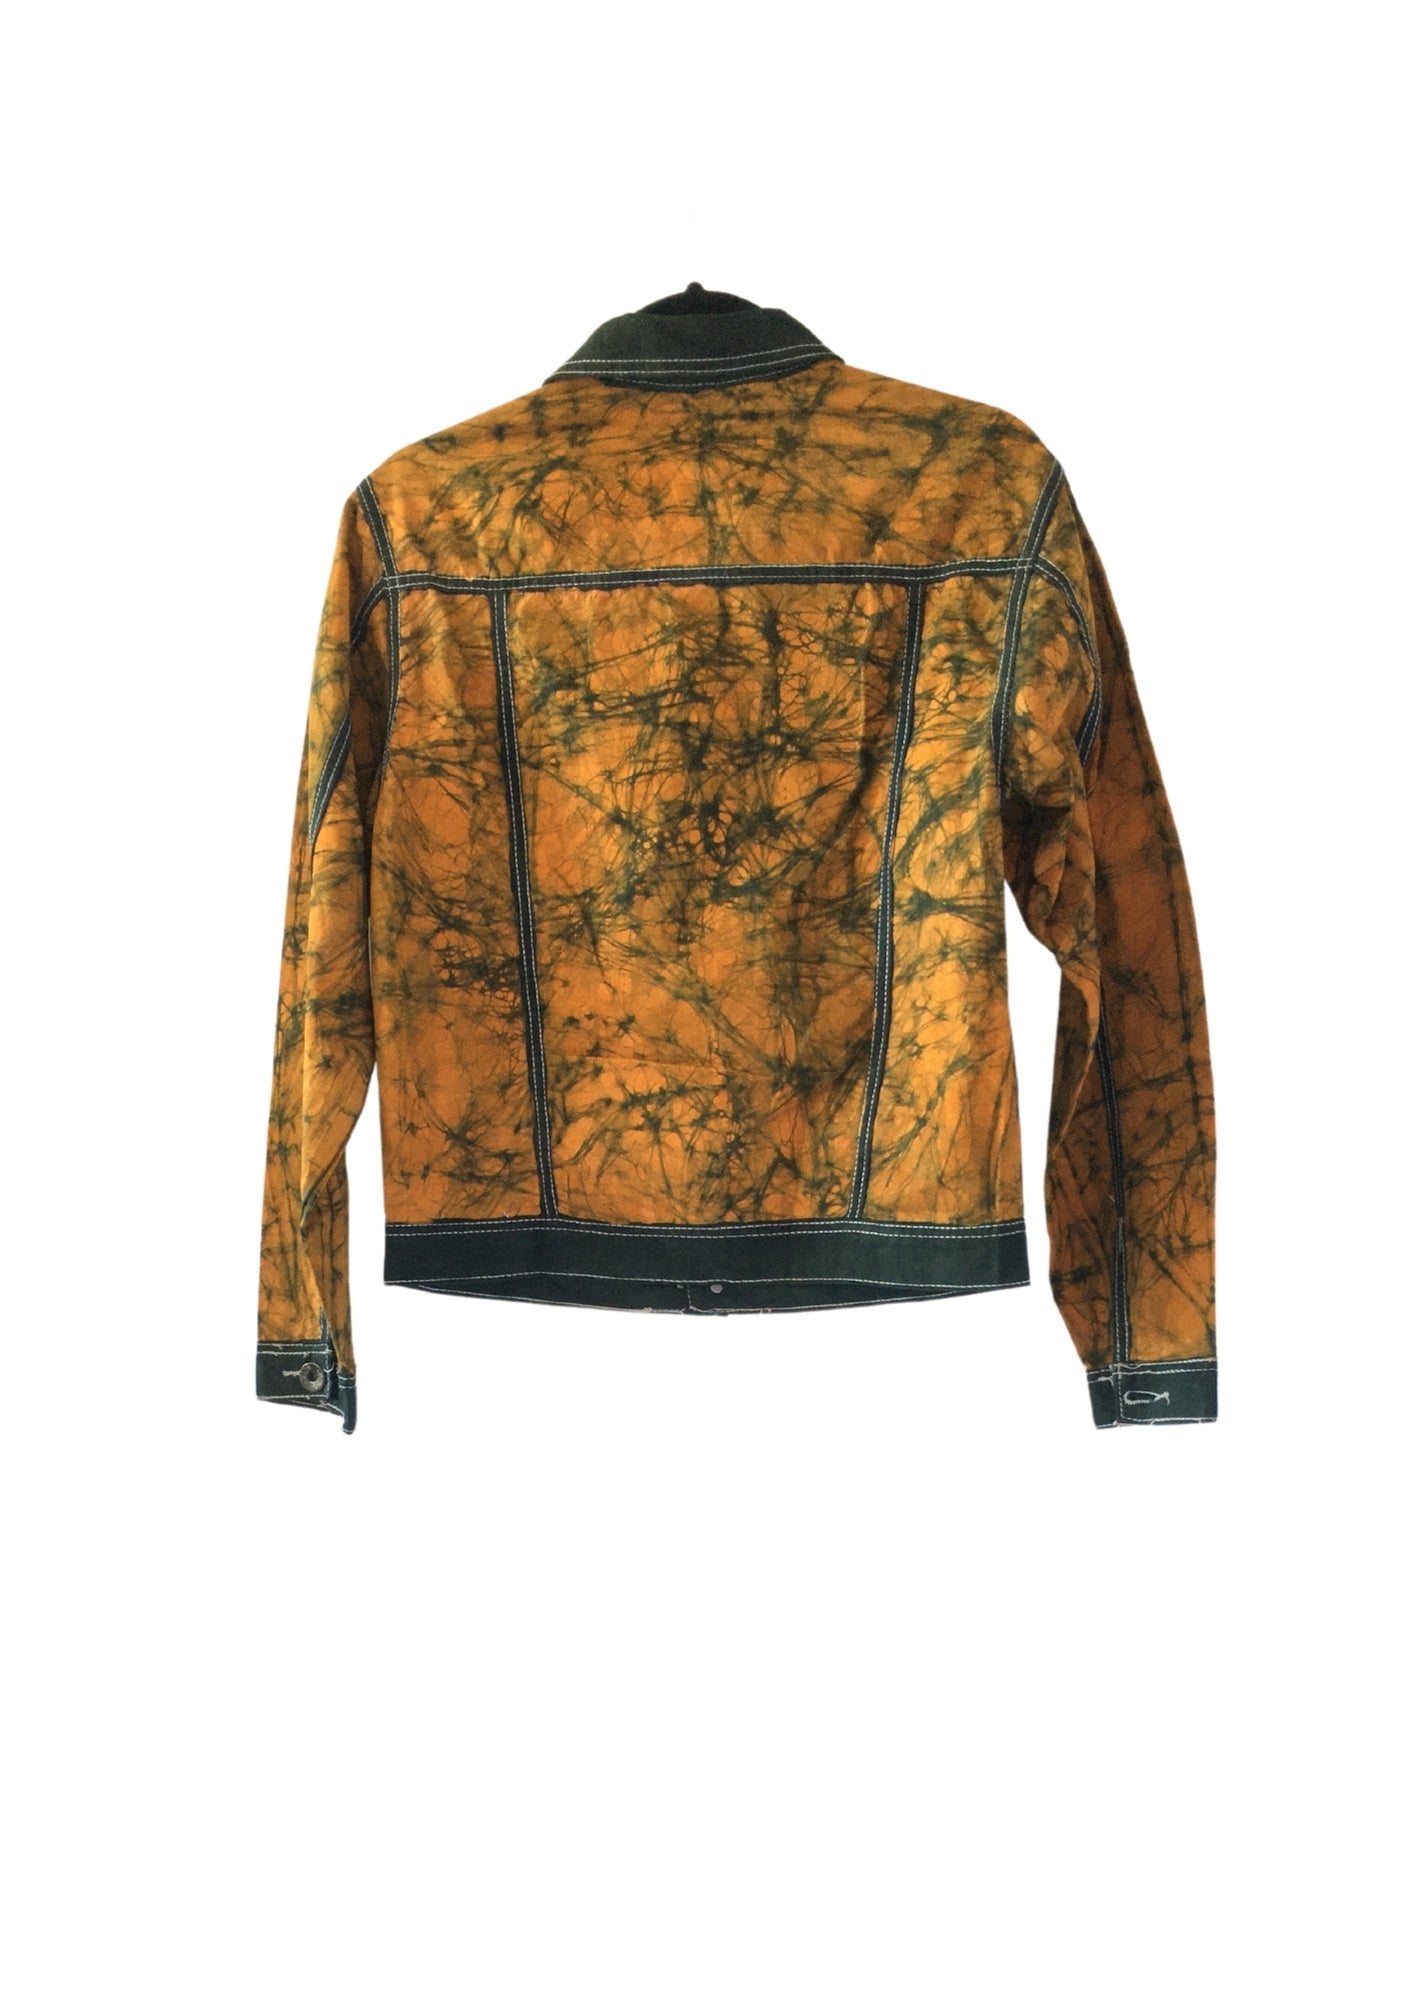 Linen Lightweight Batik Trucker Jacket Gold and Green -Contemporary and Colorful Ensemble-African apparel and accessories